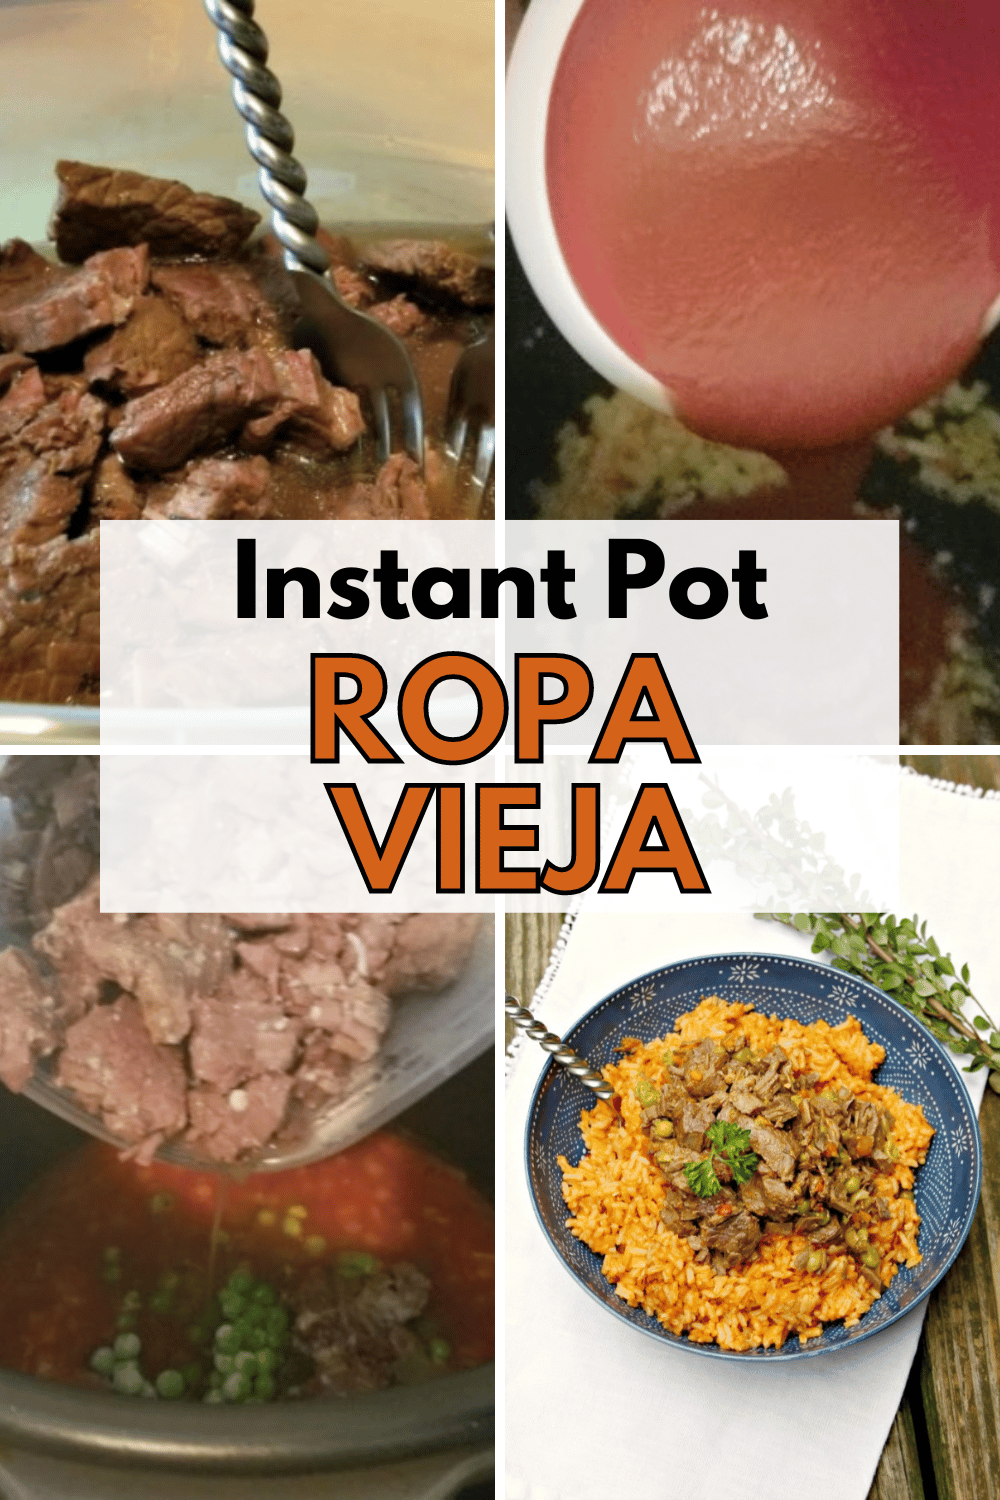 Instant Pot Ropa Vieja is the perfect combination of flavorful, tender beef and perfectly cooked veggies. It’s a delicious, hearty meal. #instantpot #pressurecooker #ropavieja #instantpotropavieja via @wondermomwannab